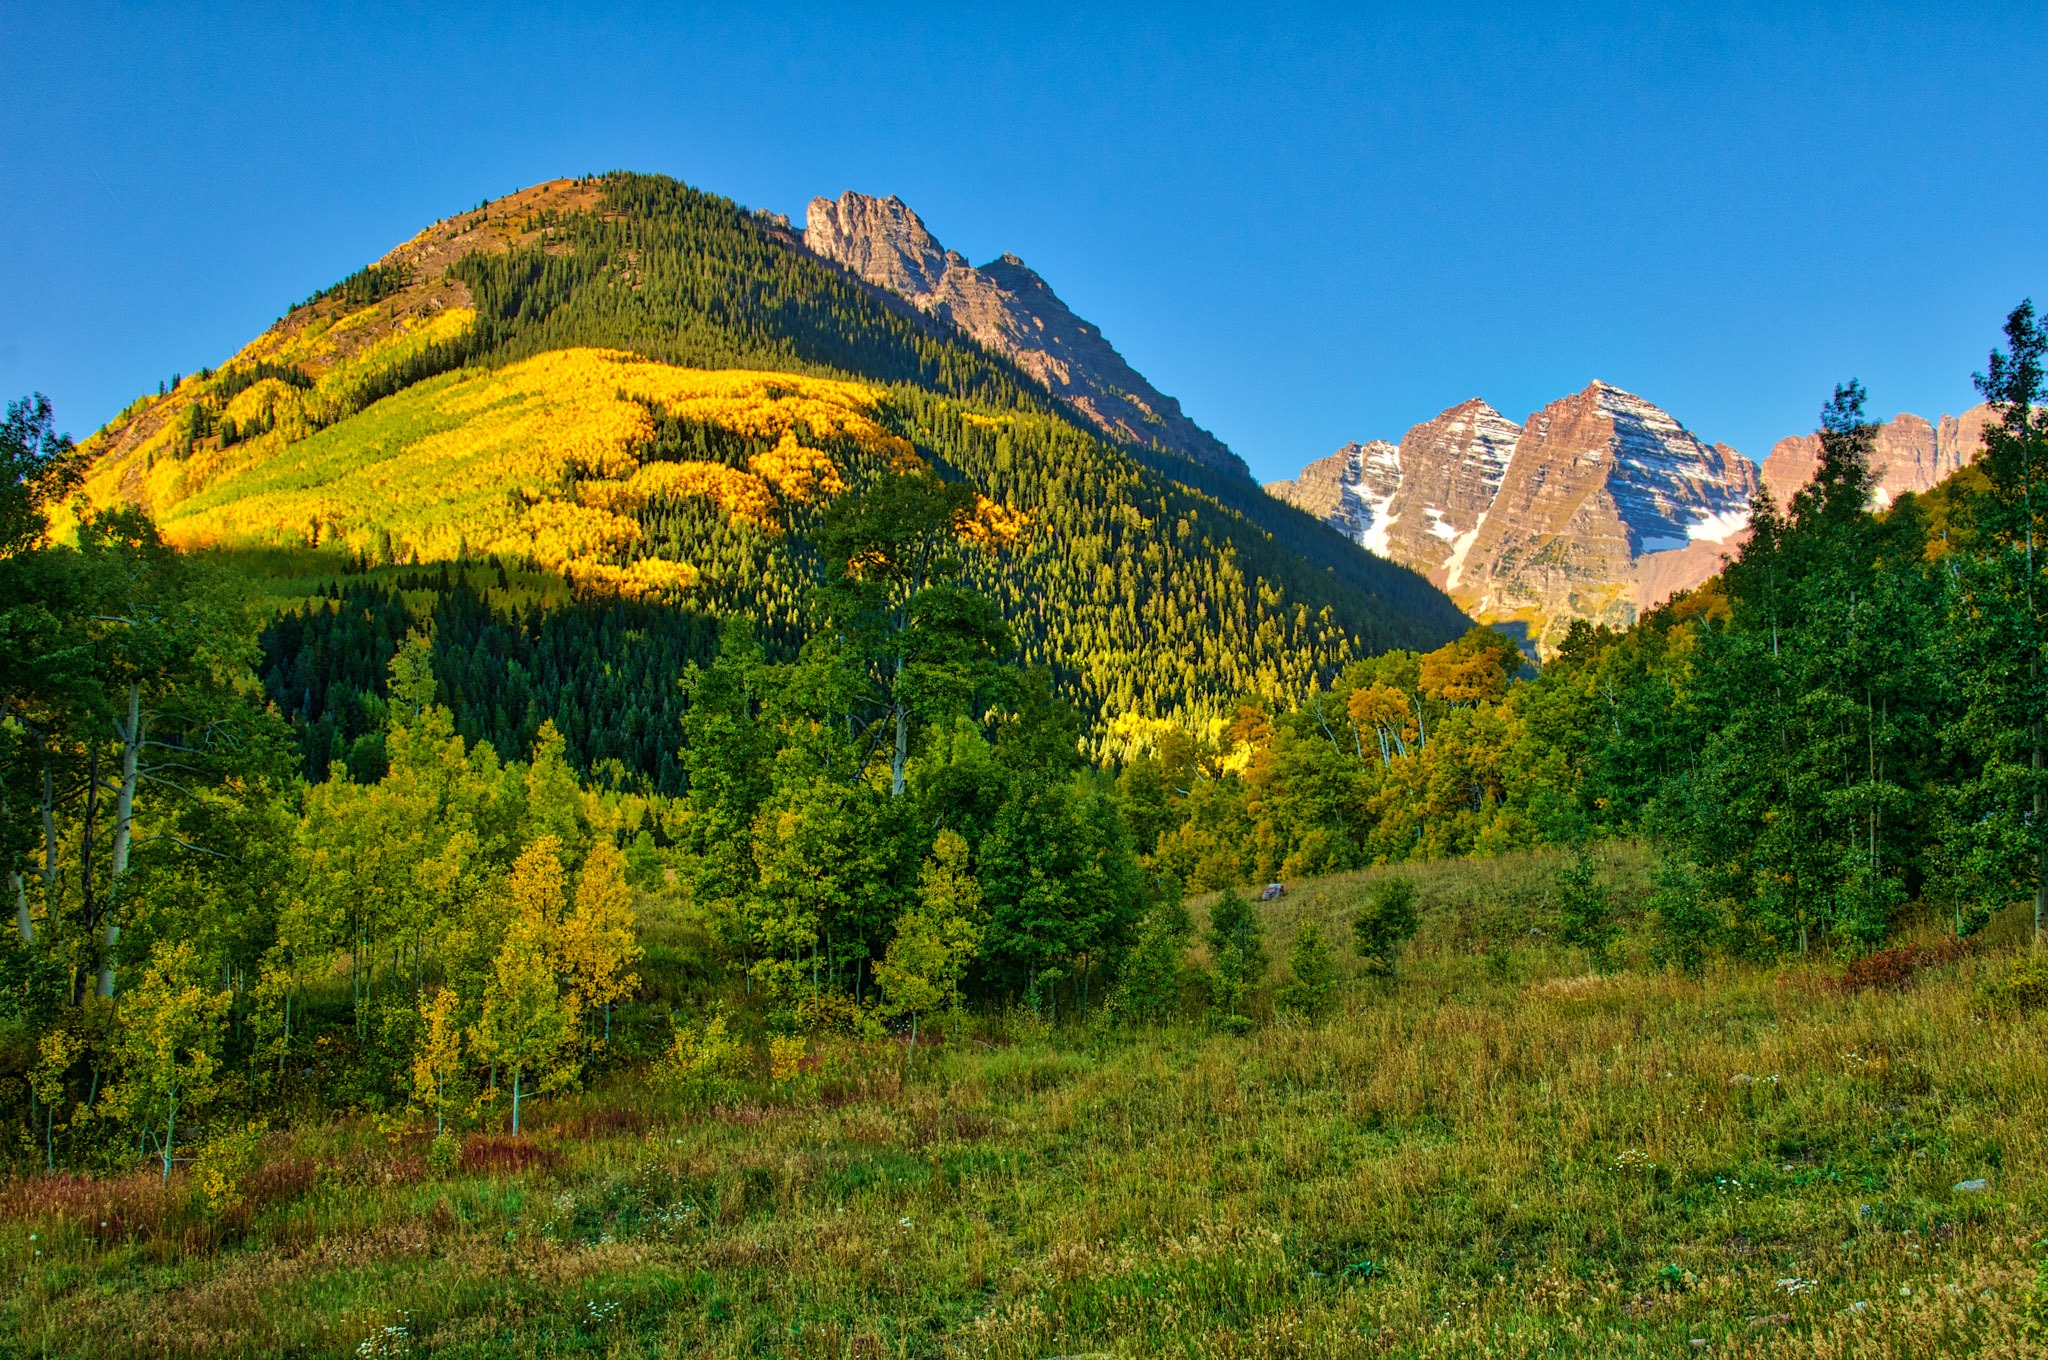 A view of the Maroon Bells in the crisp morning light in the Maroon Bells Recreation Area near Aspen, Colorado.